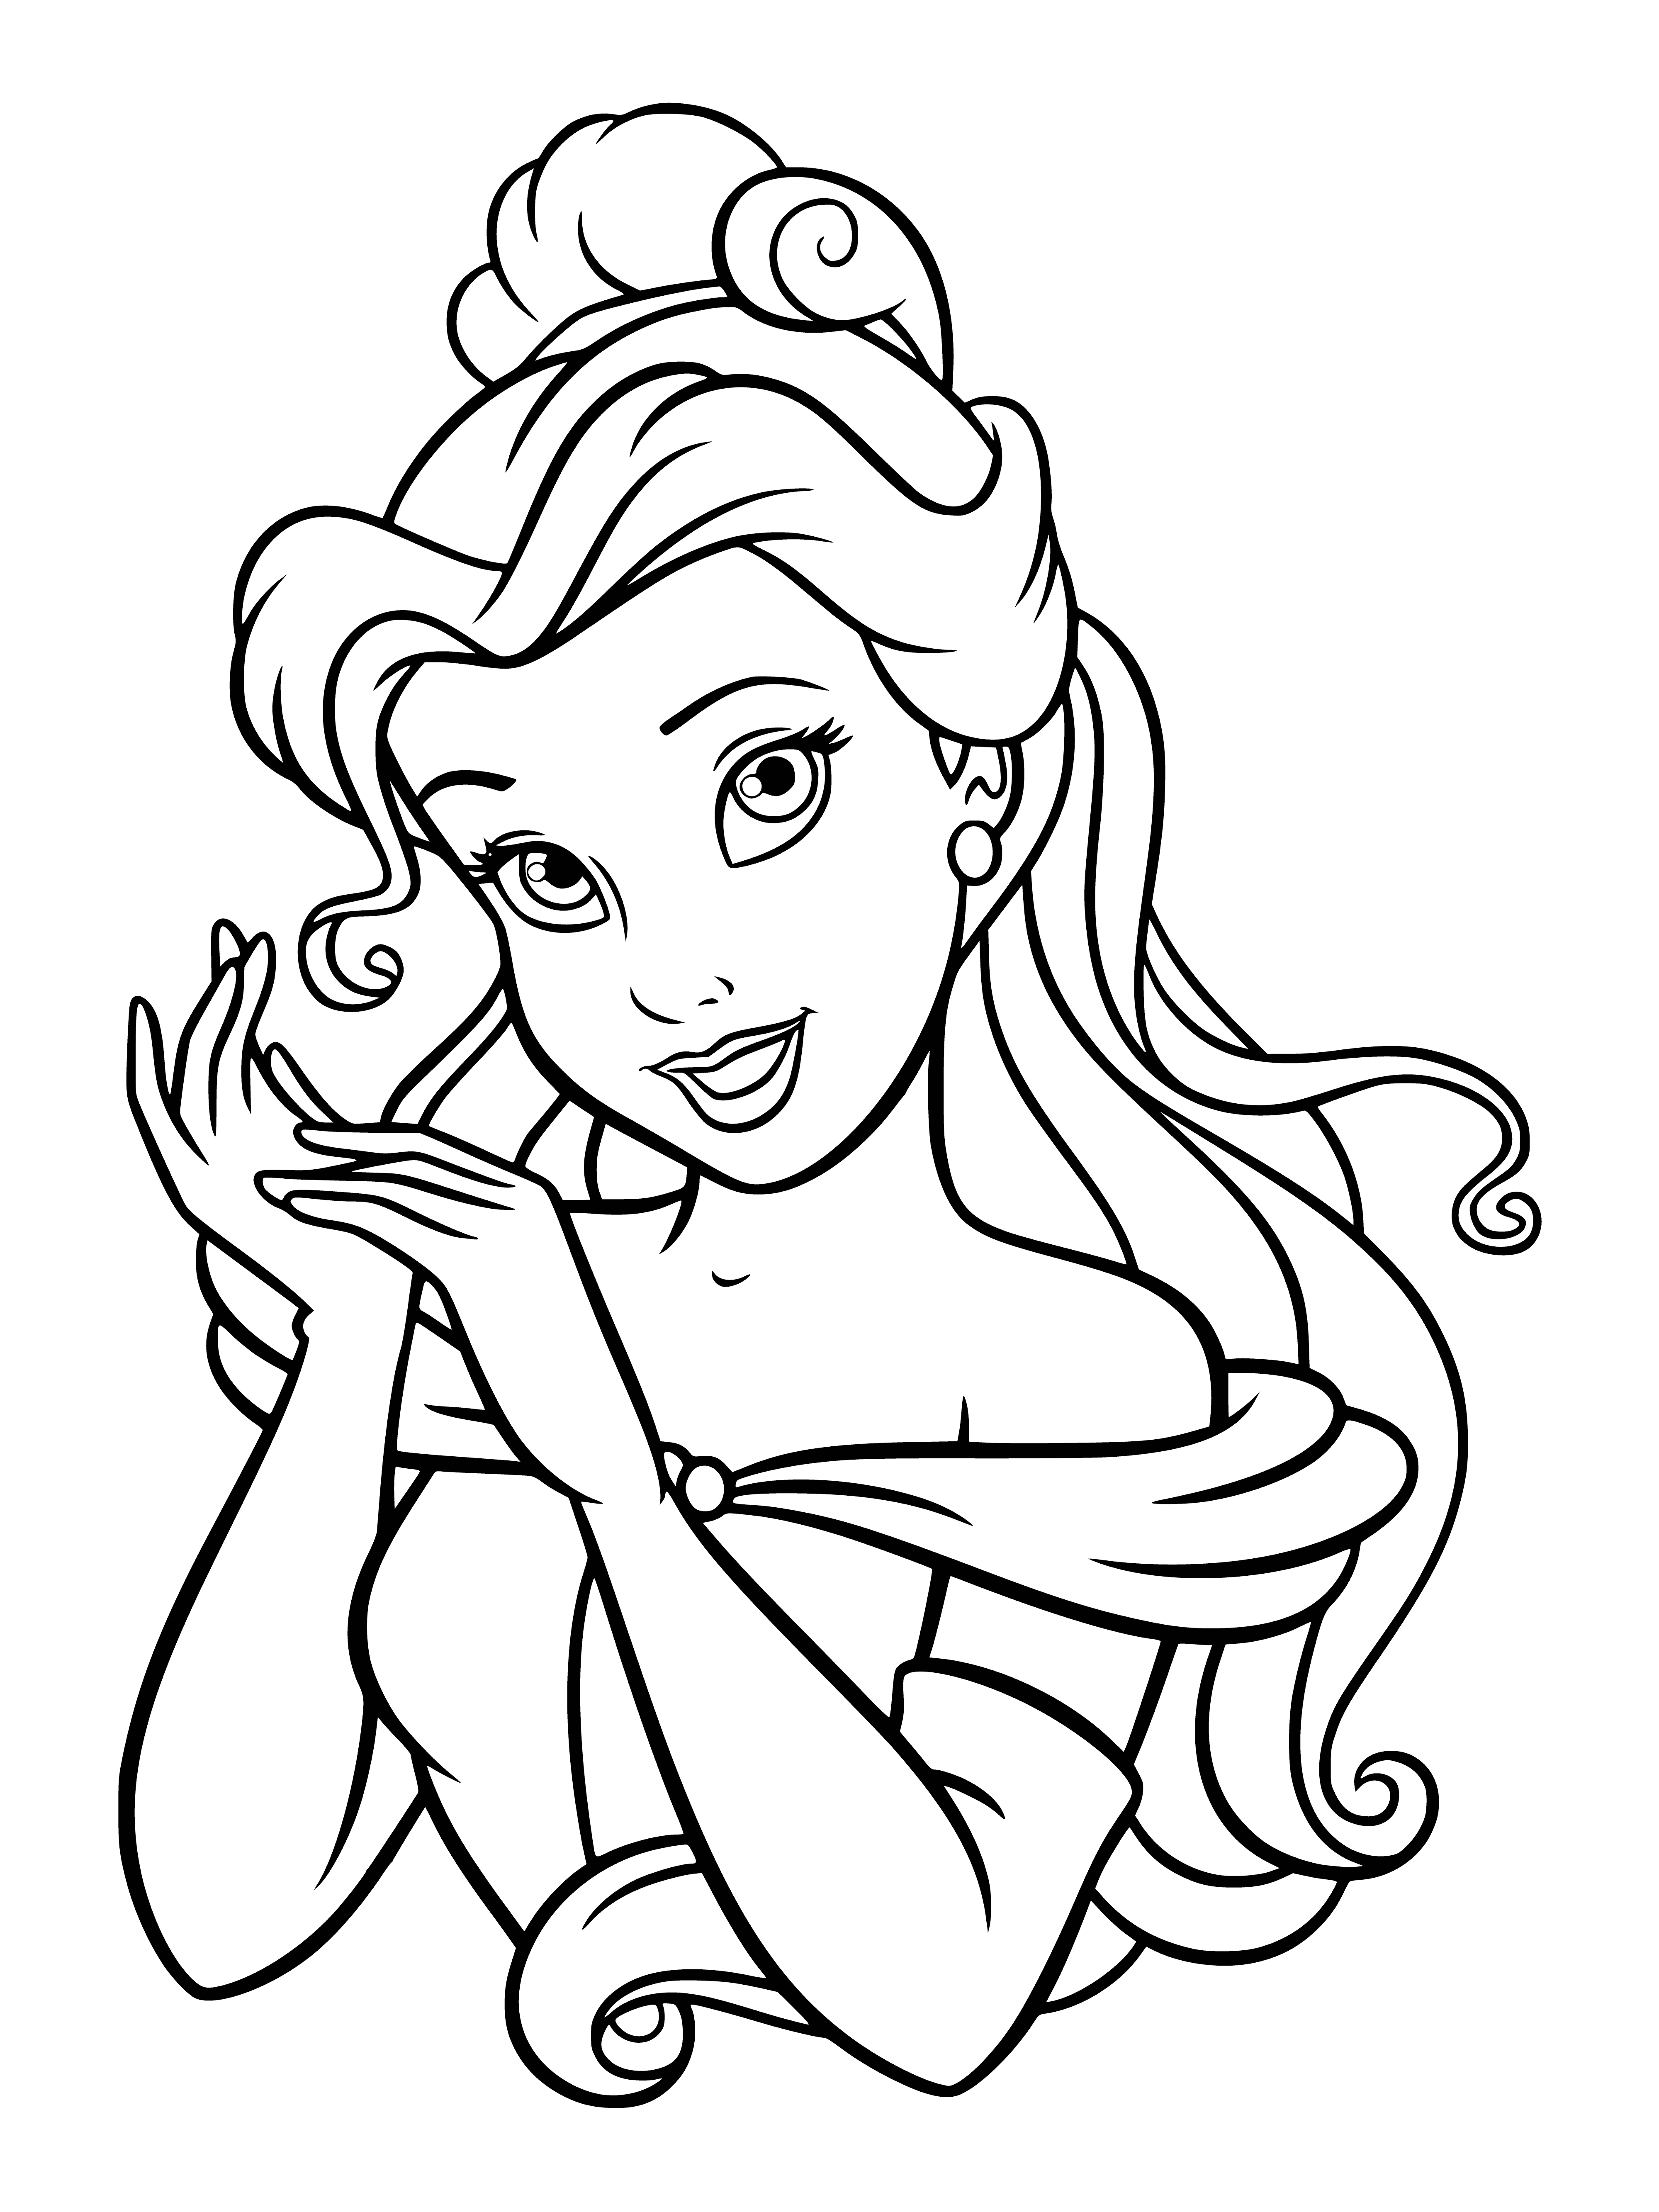 coloring page: Woman looks at a blue, furry creature with horns, yellow eyes and two arms standing on two legs.